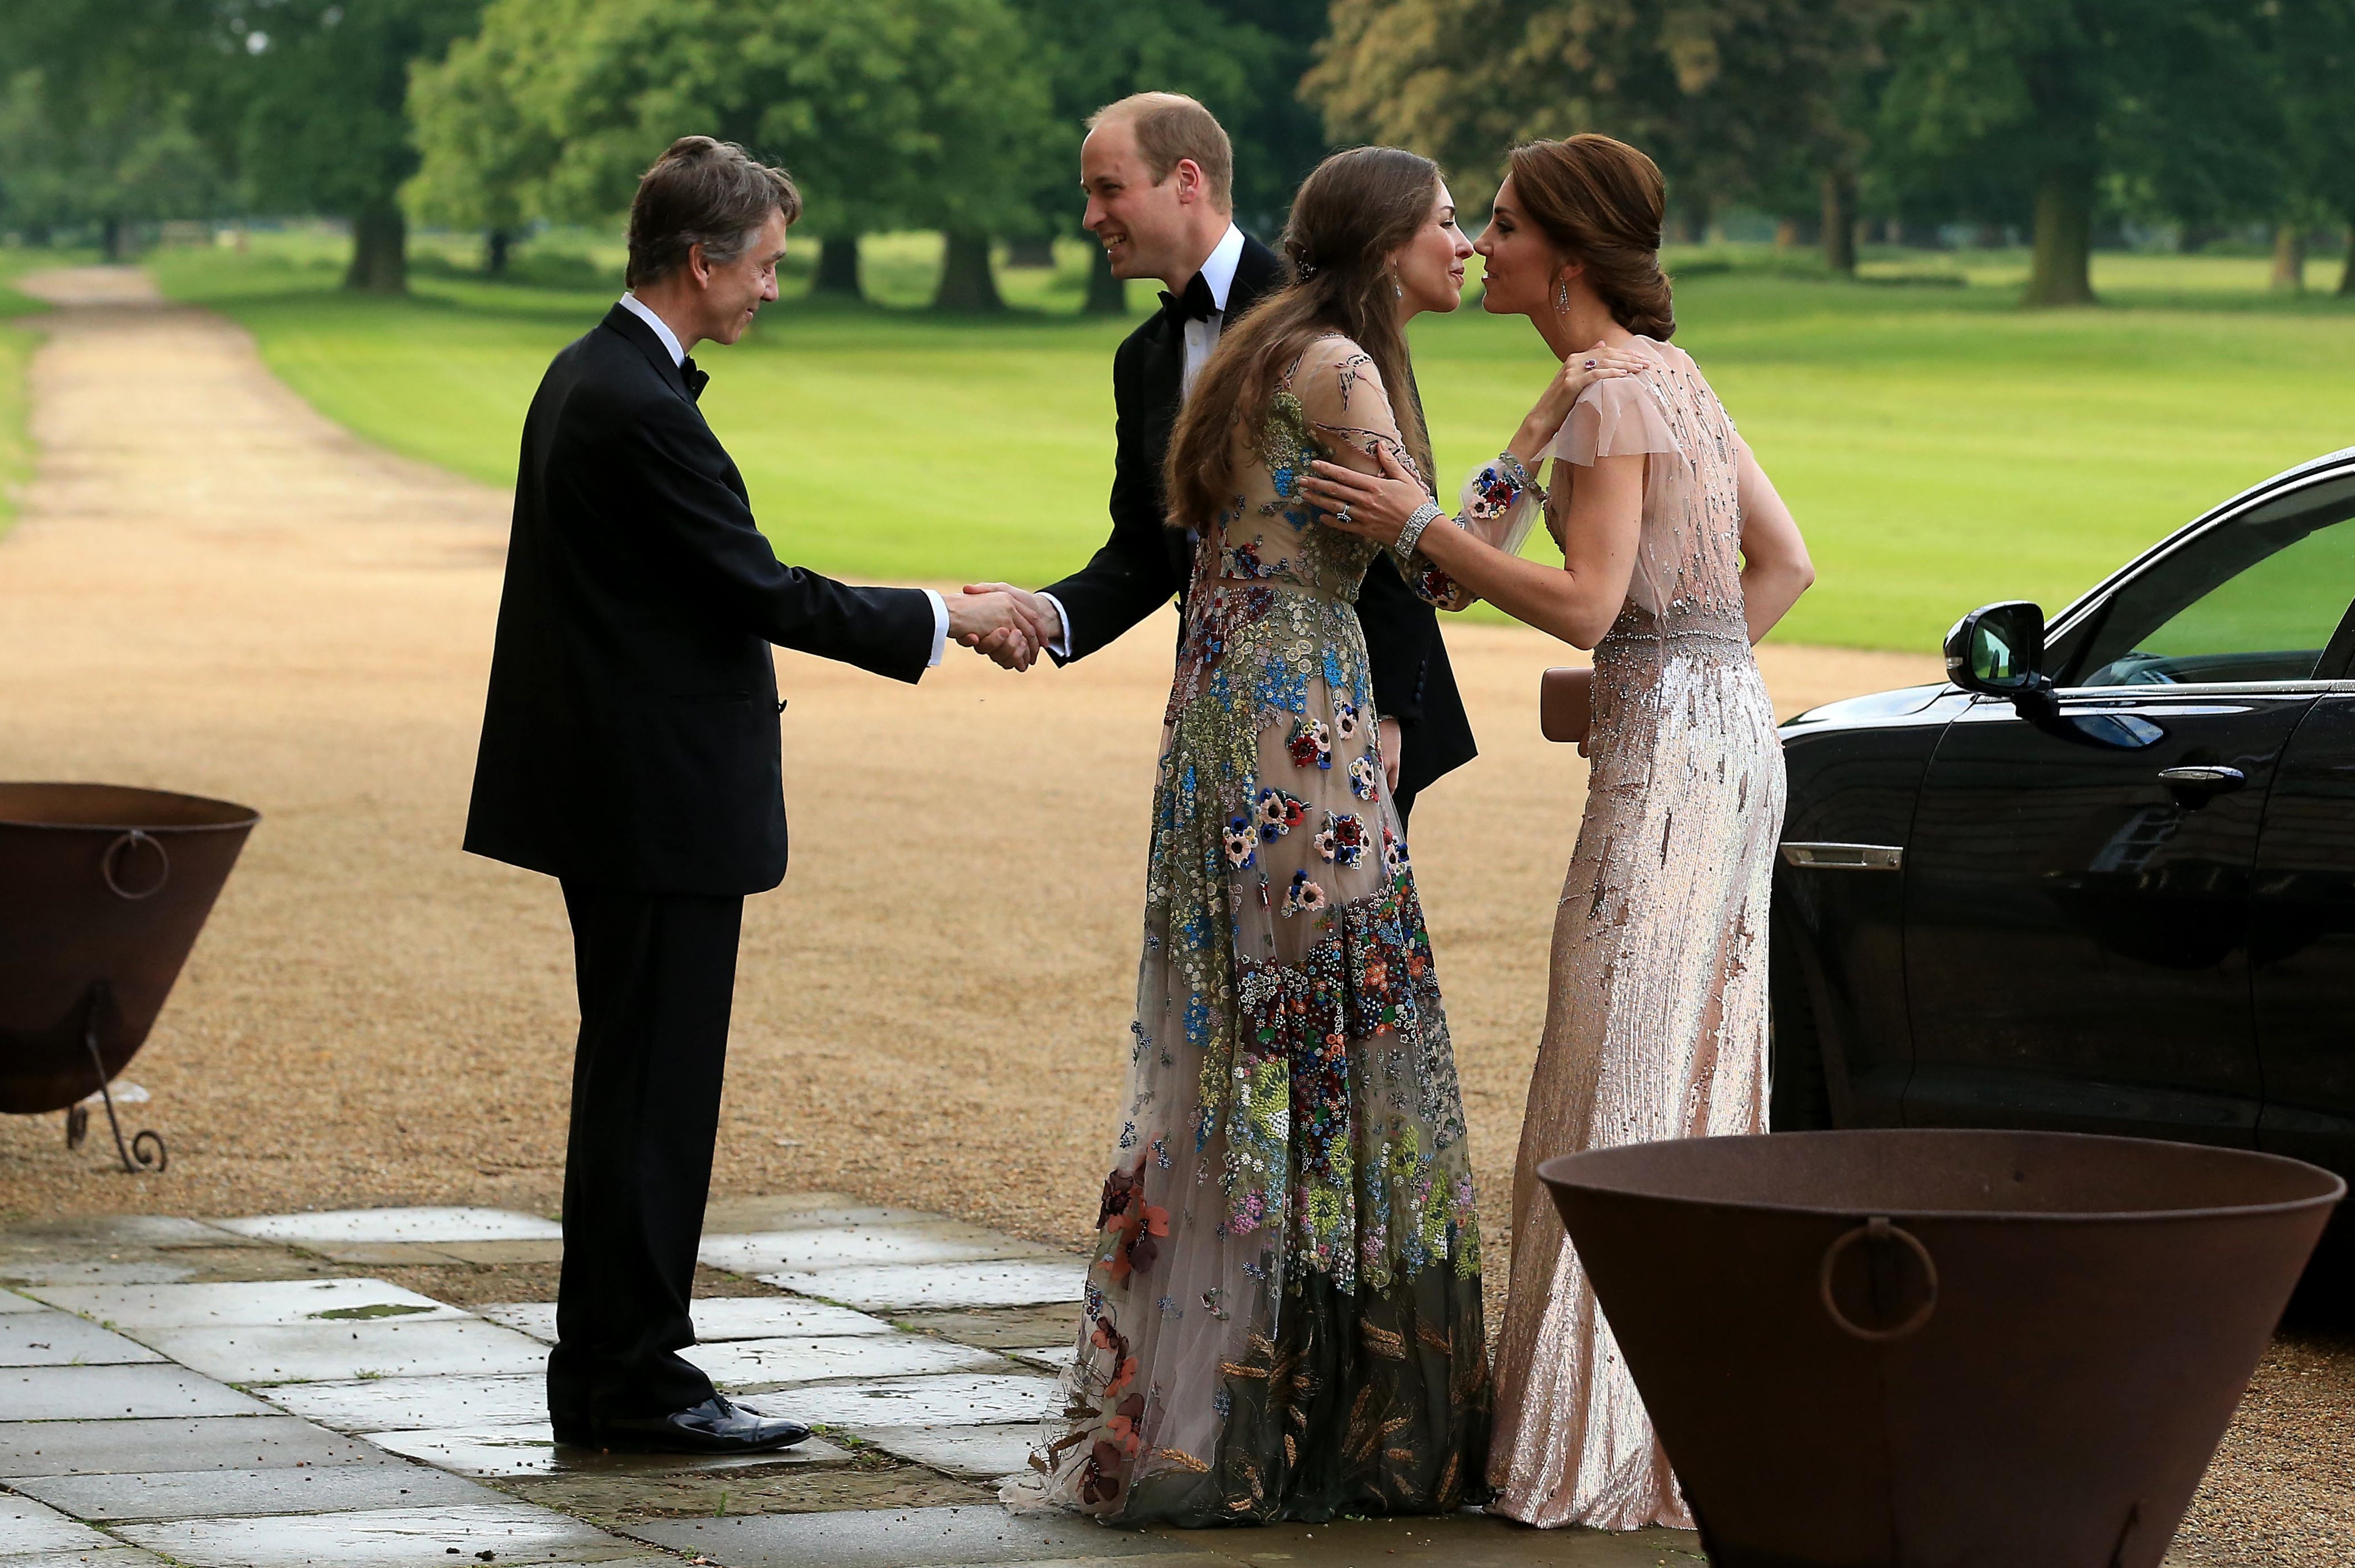 Prince William and Kate Middleton are greeted by David Cholmondeley, Marquess of Cholmondeley and Rose Cholmondeley, the Marchioness of Cholmondeley as they attend a gala dinner in support of East Anglia’s Children’s Hospices’ nook appeal at Houghton Hall on June 22, 2016